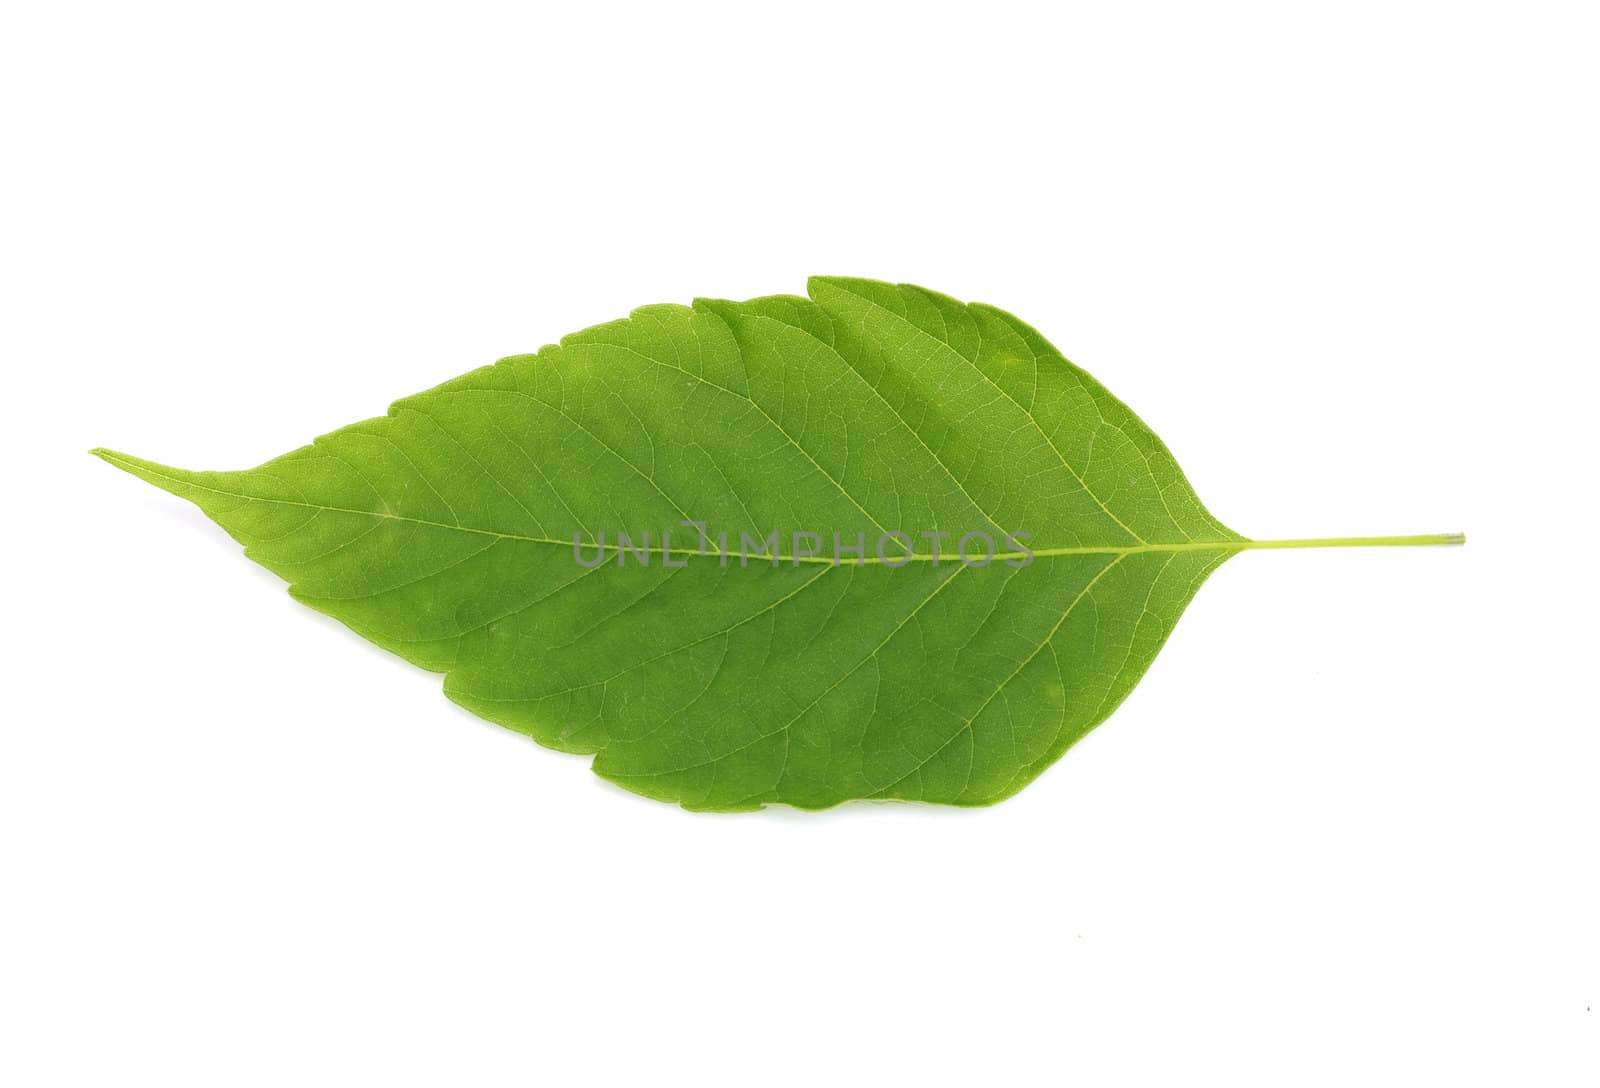 green leaf isolated on white background by schankz